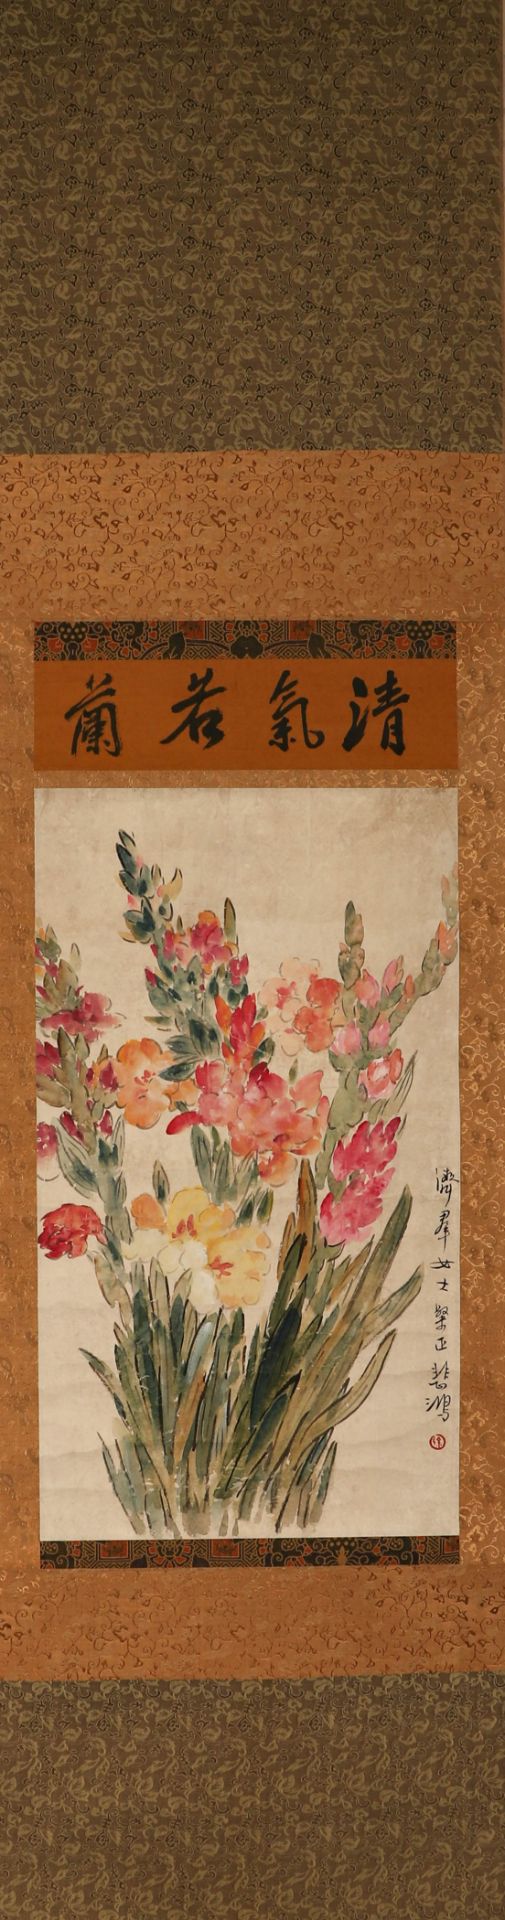 Flowers painting on paper by Xu Beihong  - Image 15 of 22